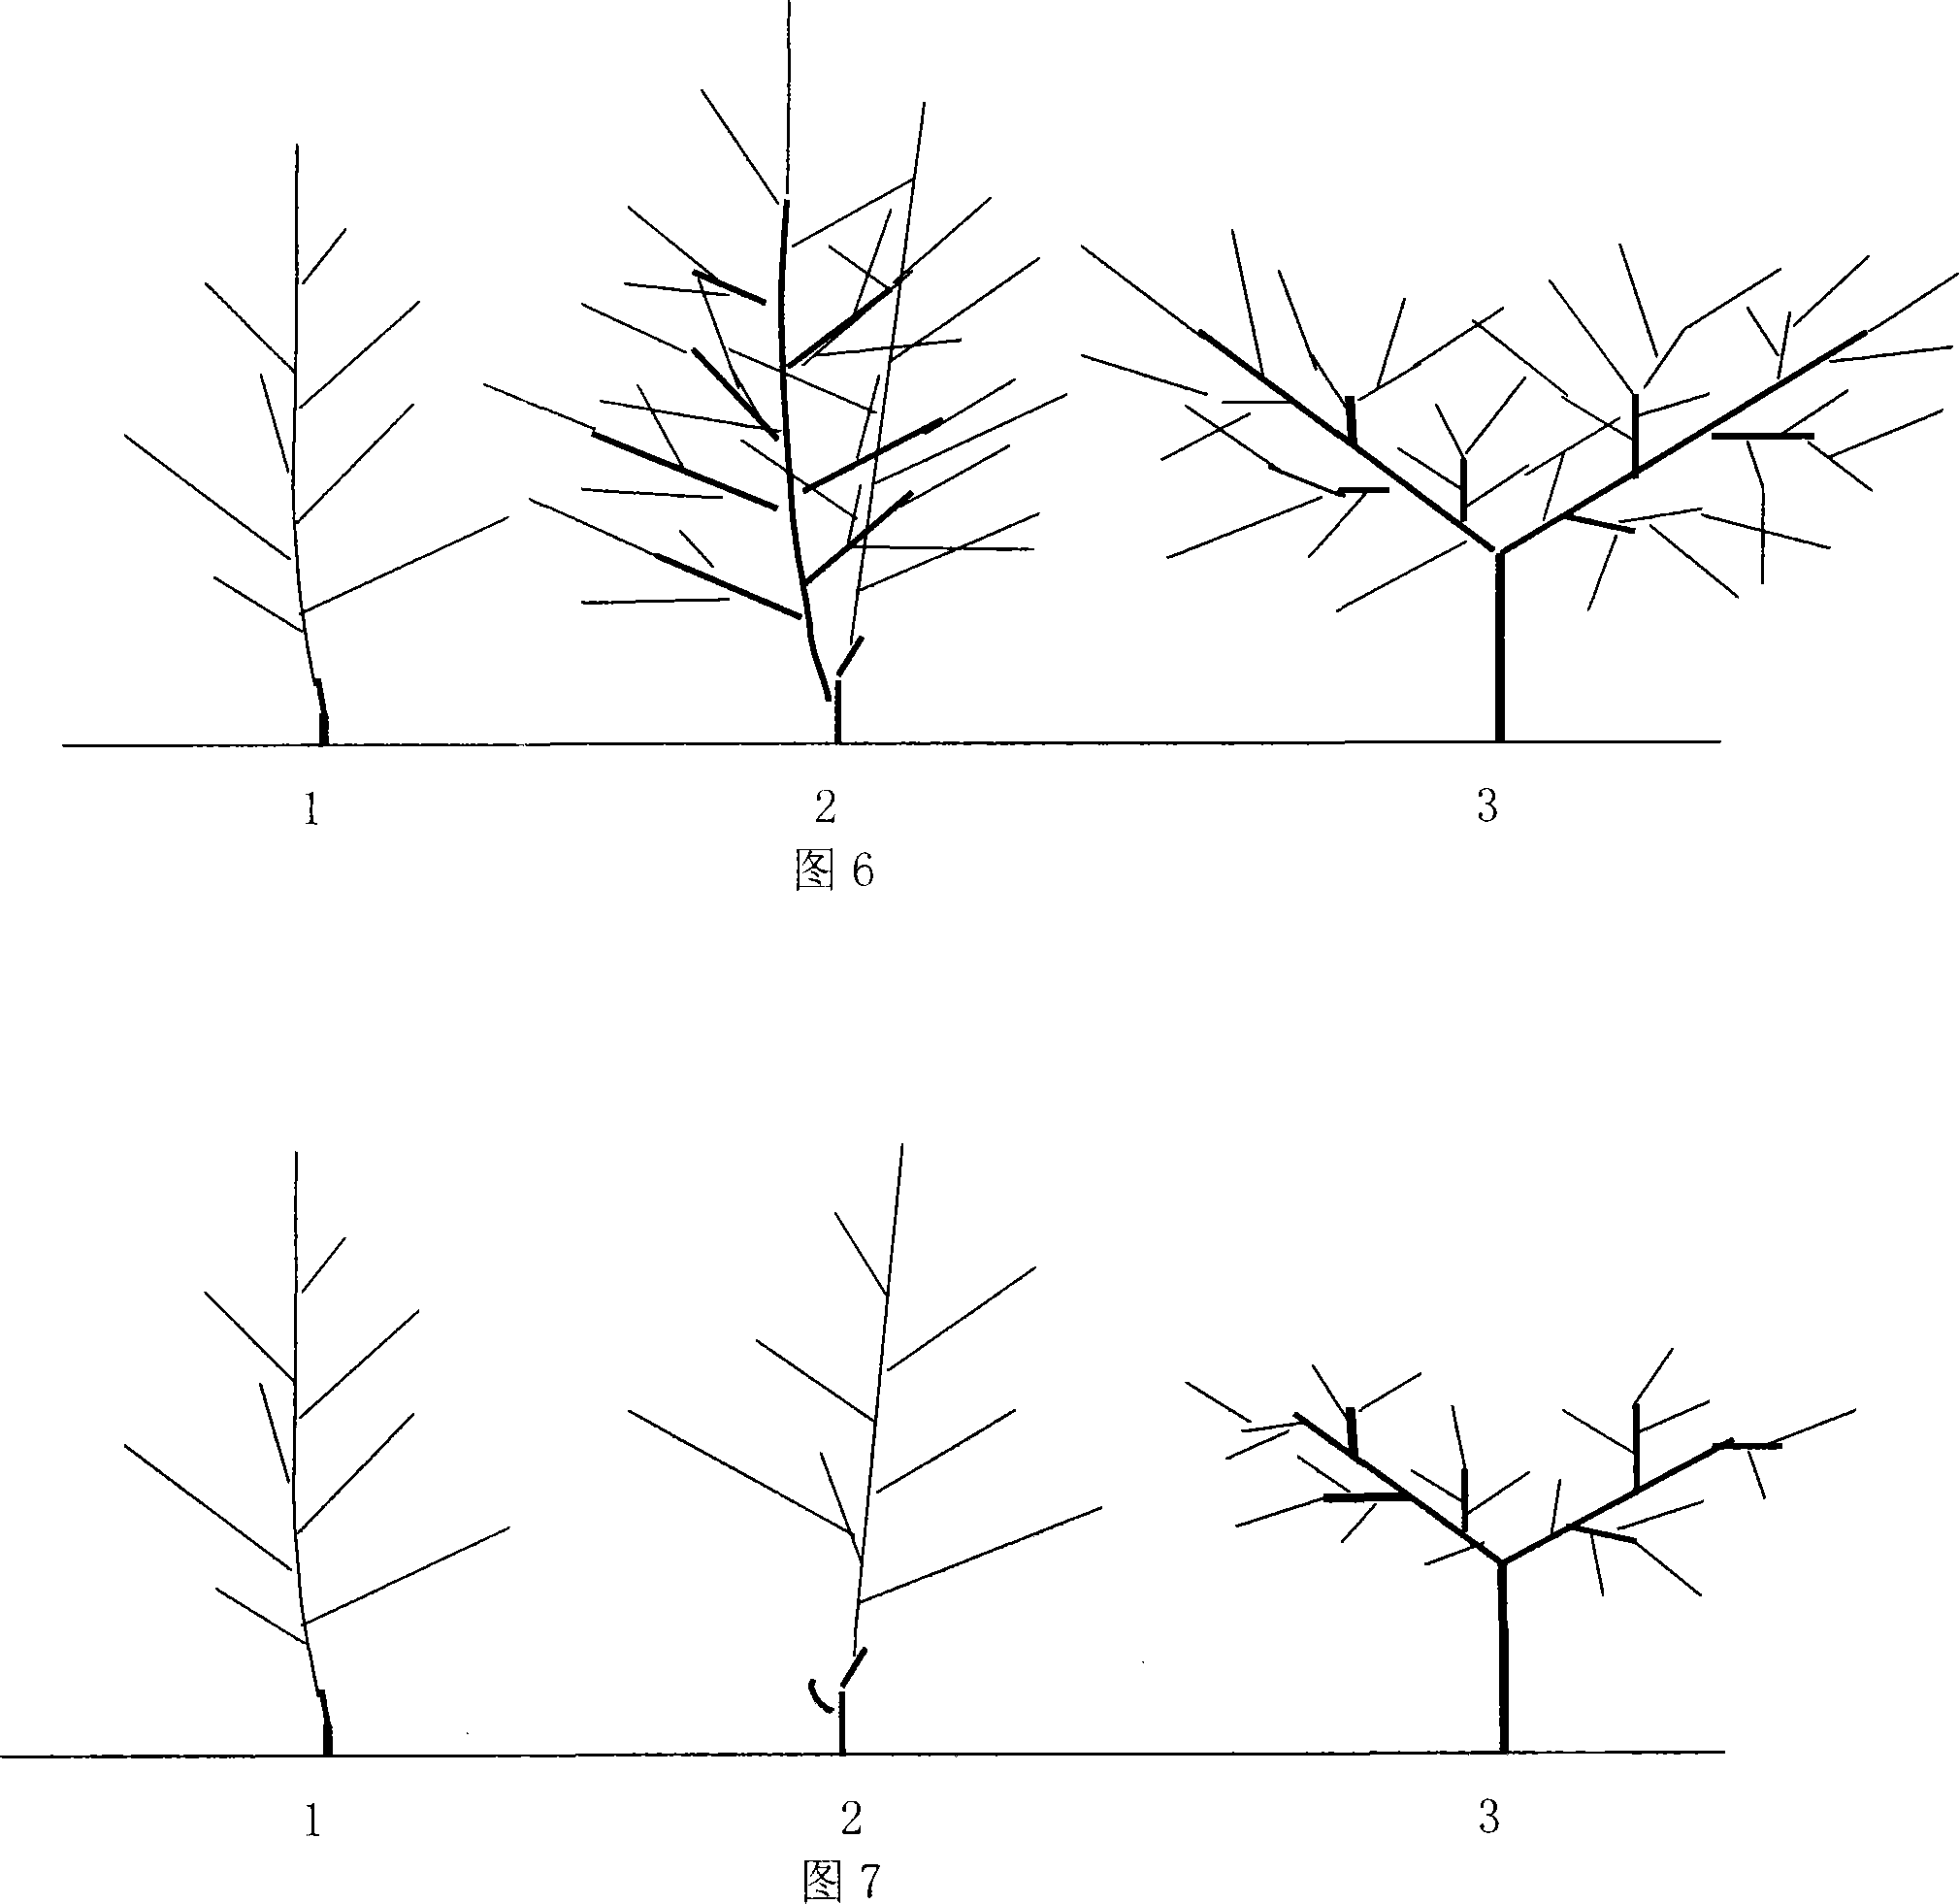 A peach shape for high-density planting and tree body controlling means